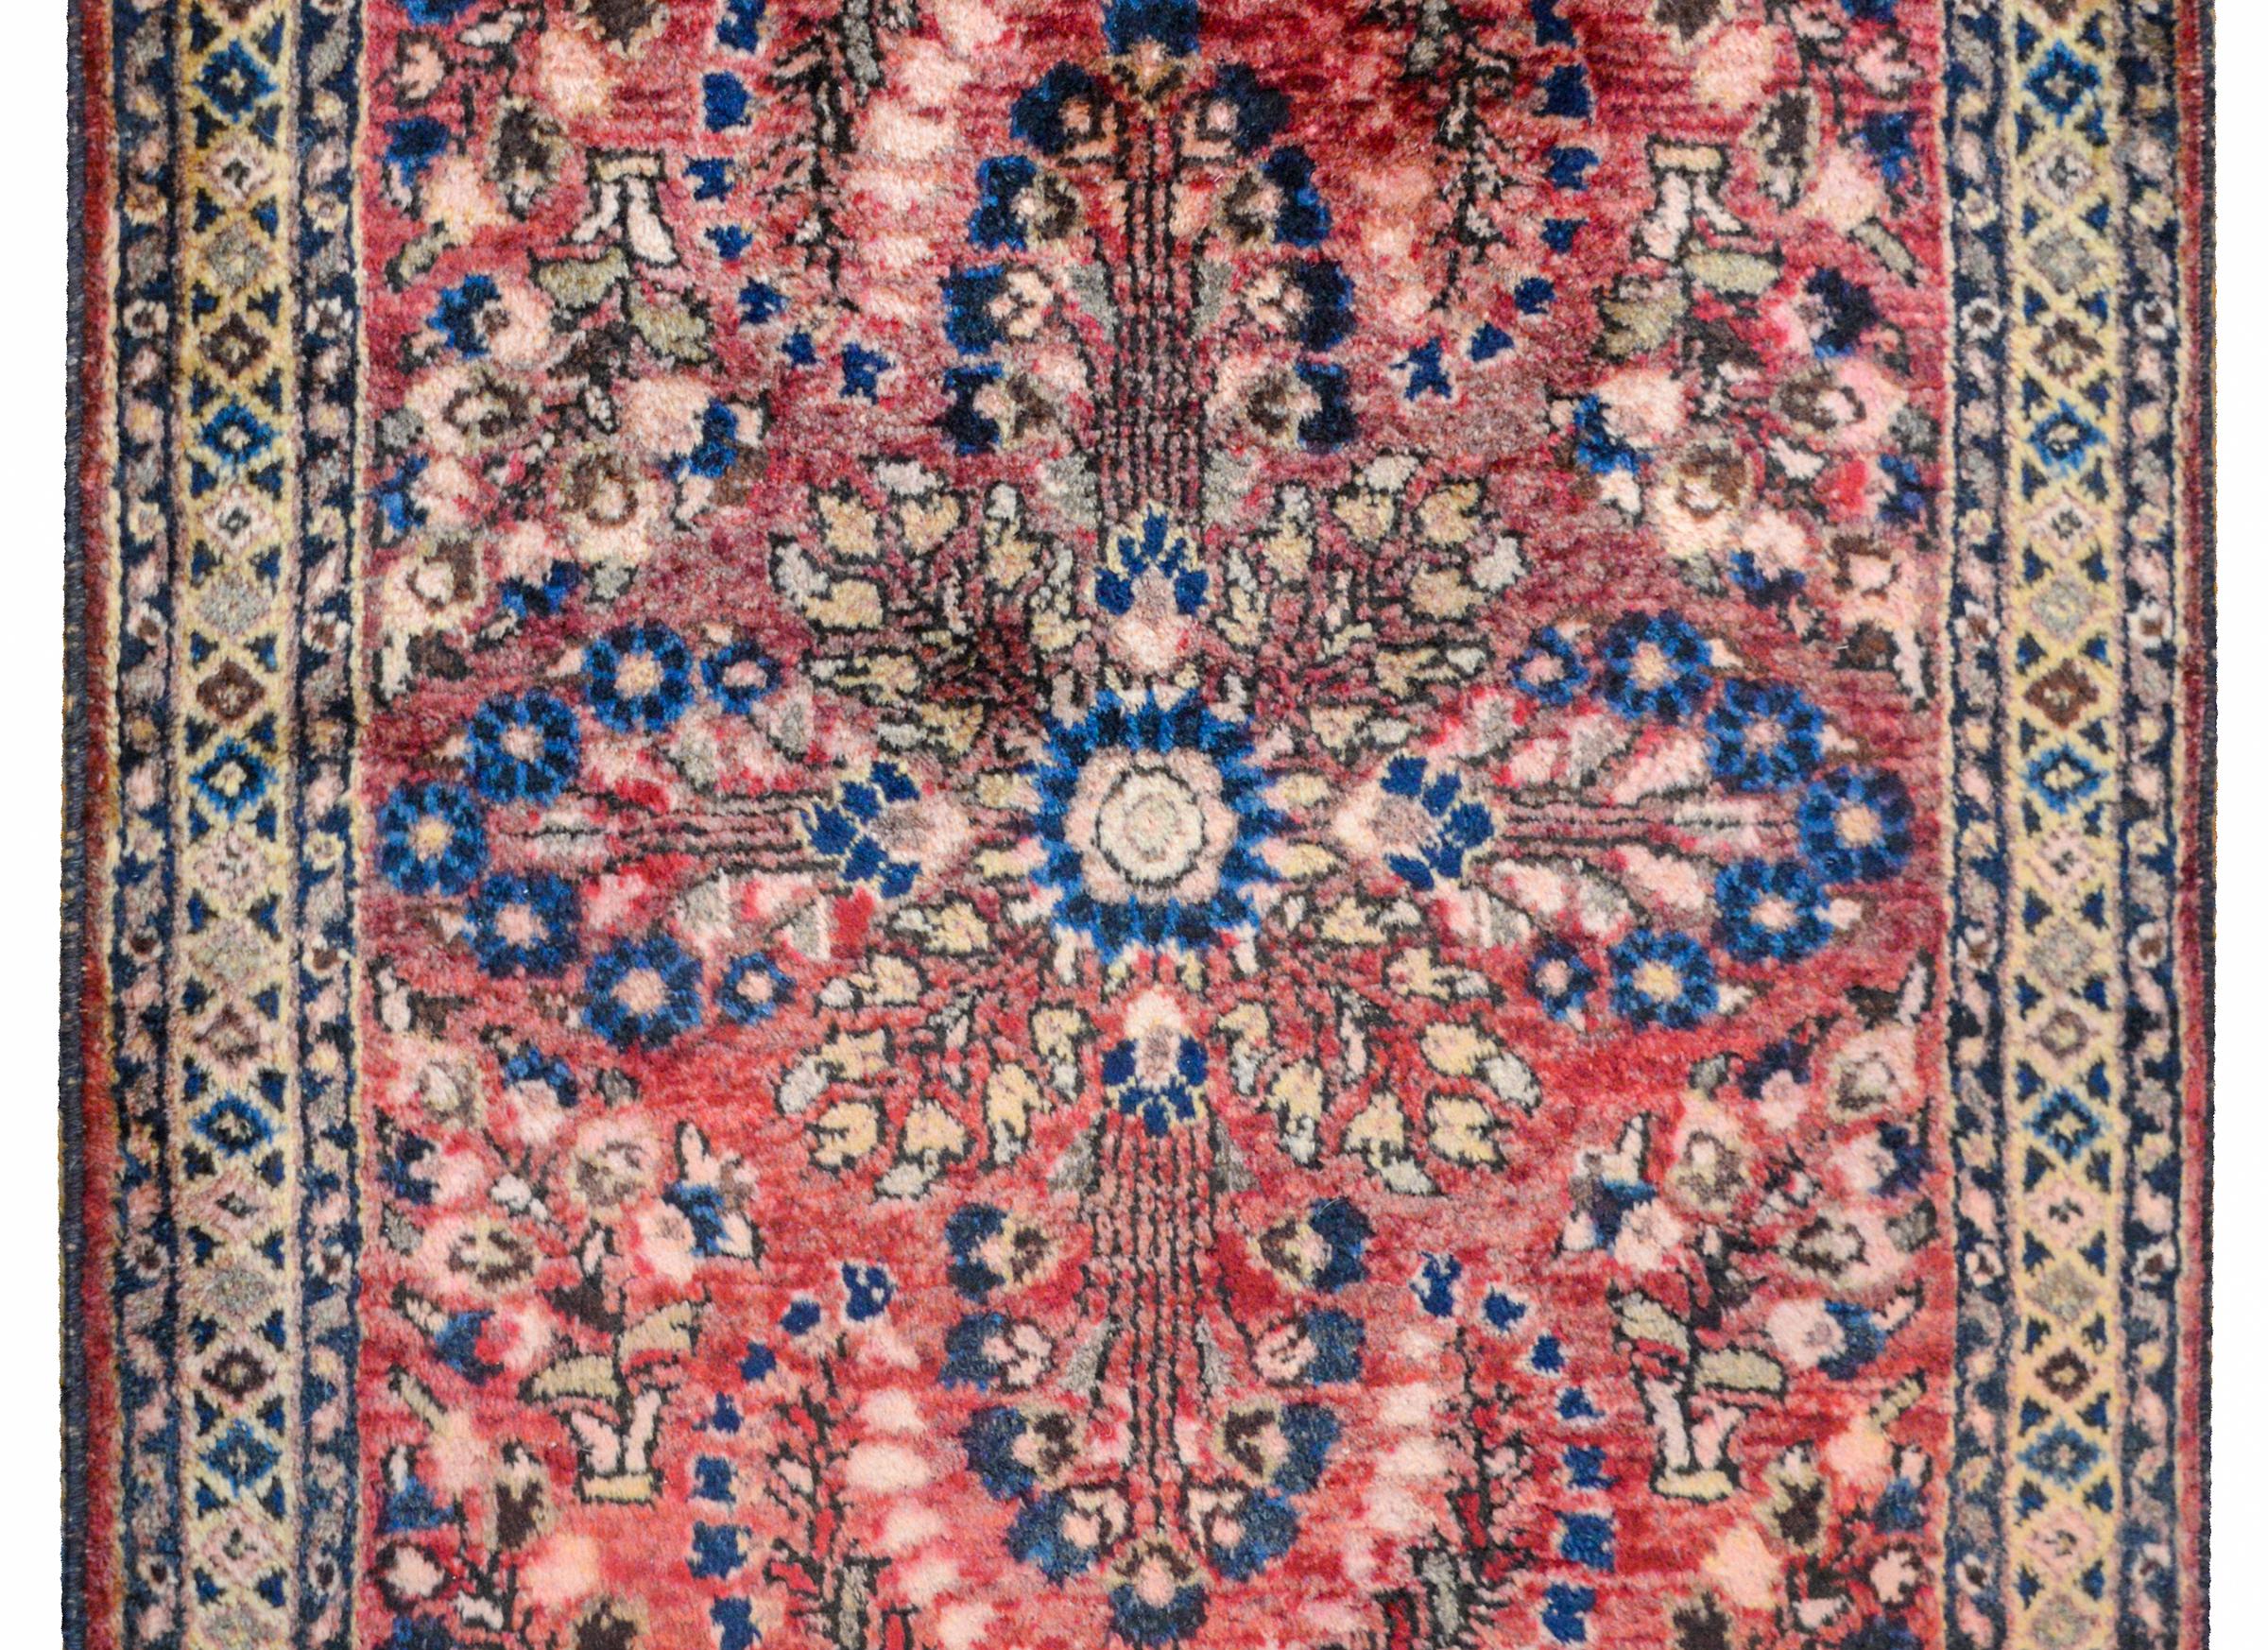 A traditional early 20th century Persian Sarouk rug with a mirrored tree-of-life pattern woven in indigo, brown, beige, and pink vegetable dyed wool on an abrash cranberry background surrounded by a simple geometric border flanked by a pair of